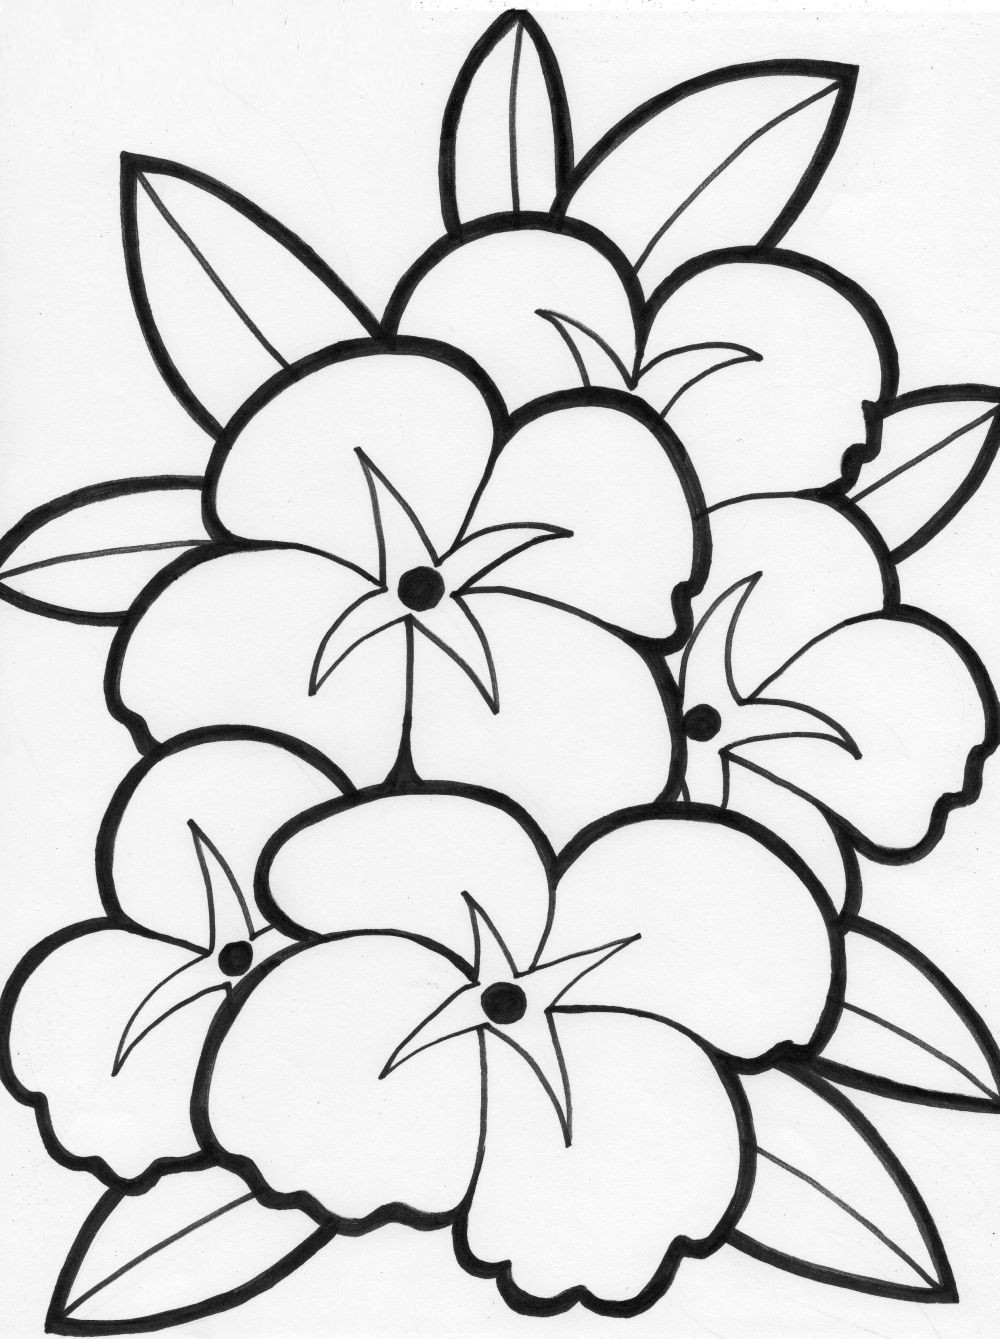 Jasmine Flower Coloring Pages at GetColorings.com | Free printable